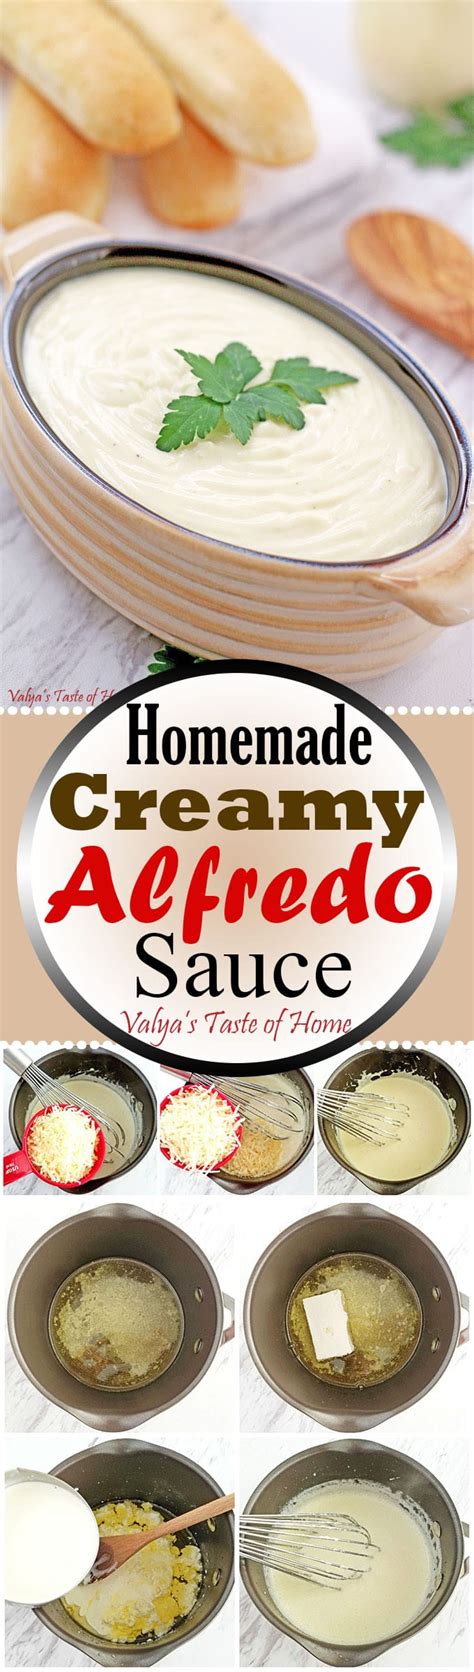 Add the cream cheese and then whisk in the heavy cream and garlic powder. Homemade Creamy Alfredo Sauce Recipe - Valya's Taste of Home